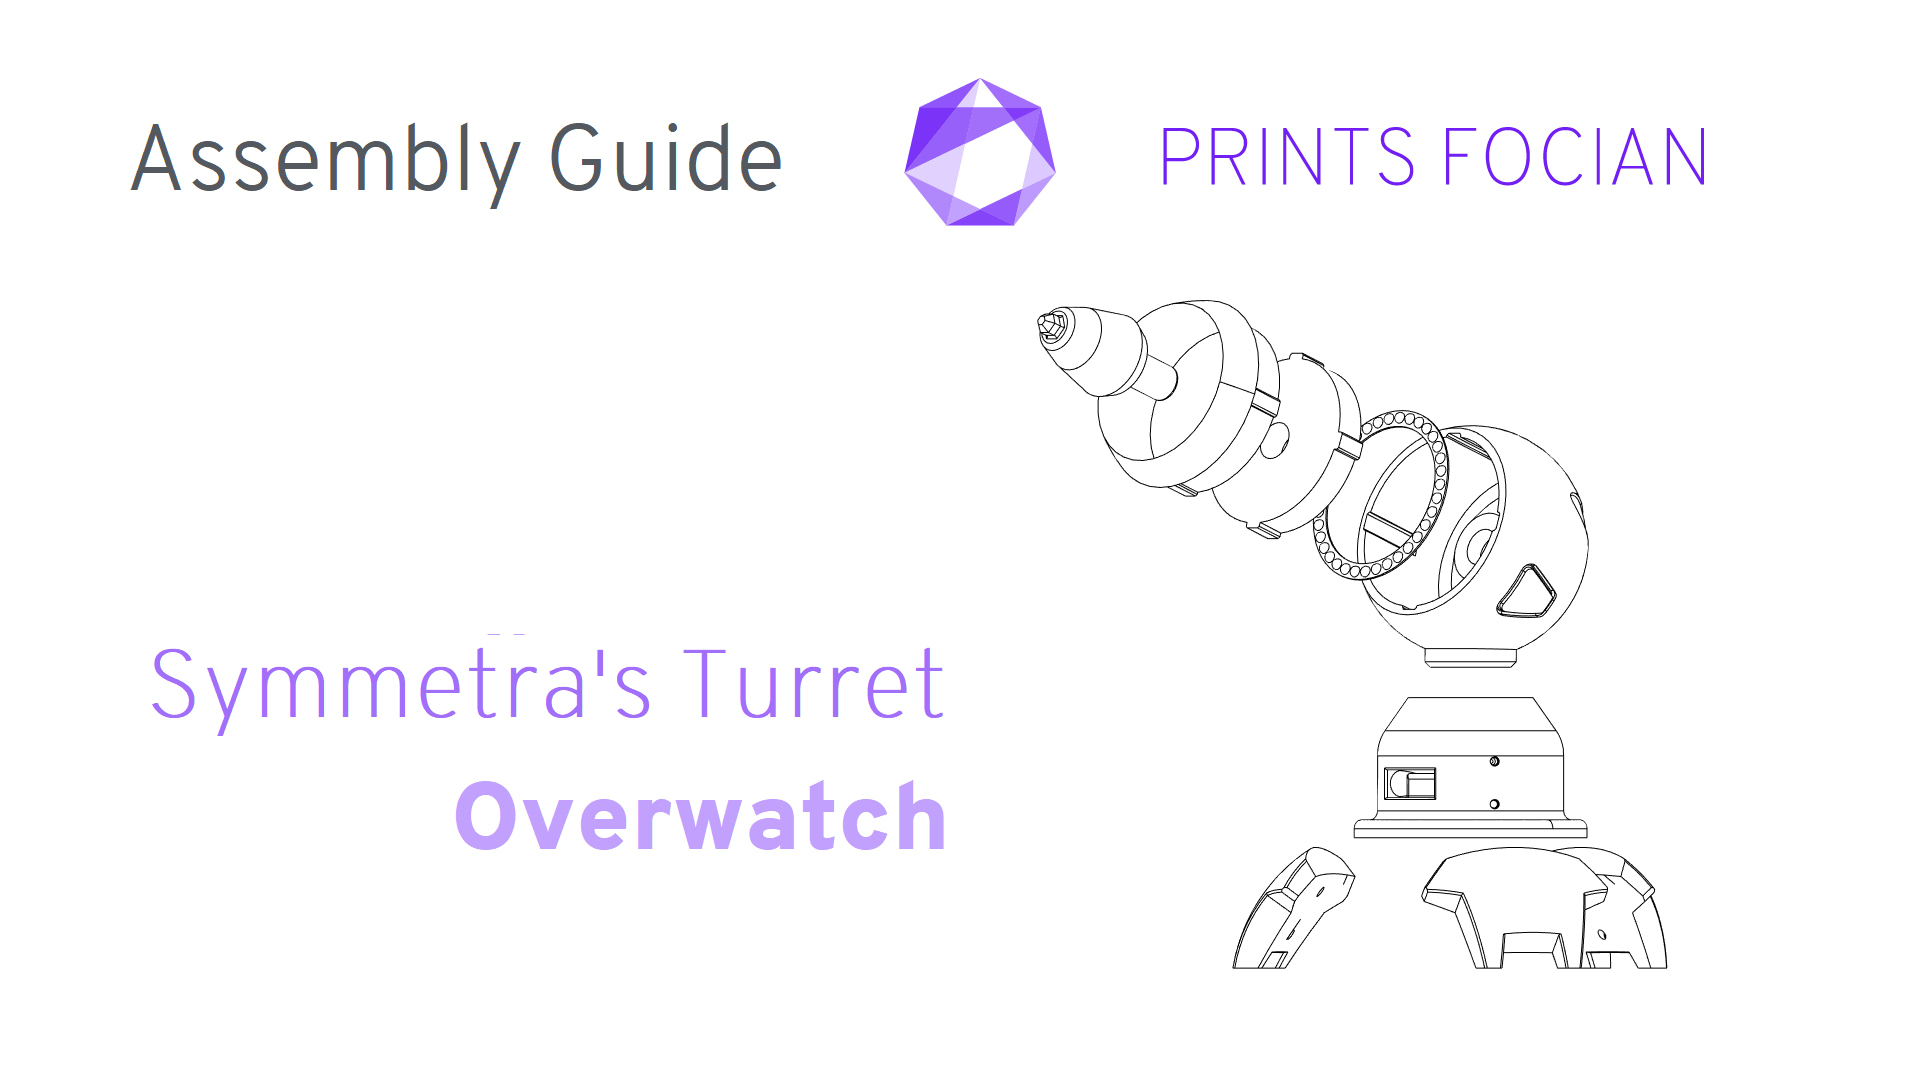 Wireframe image of an exploded Symmetra's Turret on a white background. Prints Focian Icon top and central. Text: Purple Prints Focian, Symmetra's Turret, Overwatch and dark grey Assembly Guide.